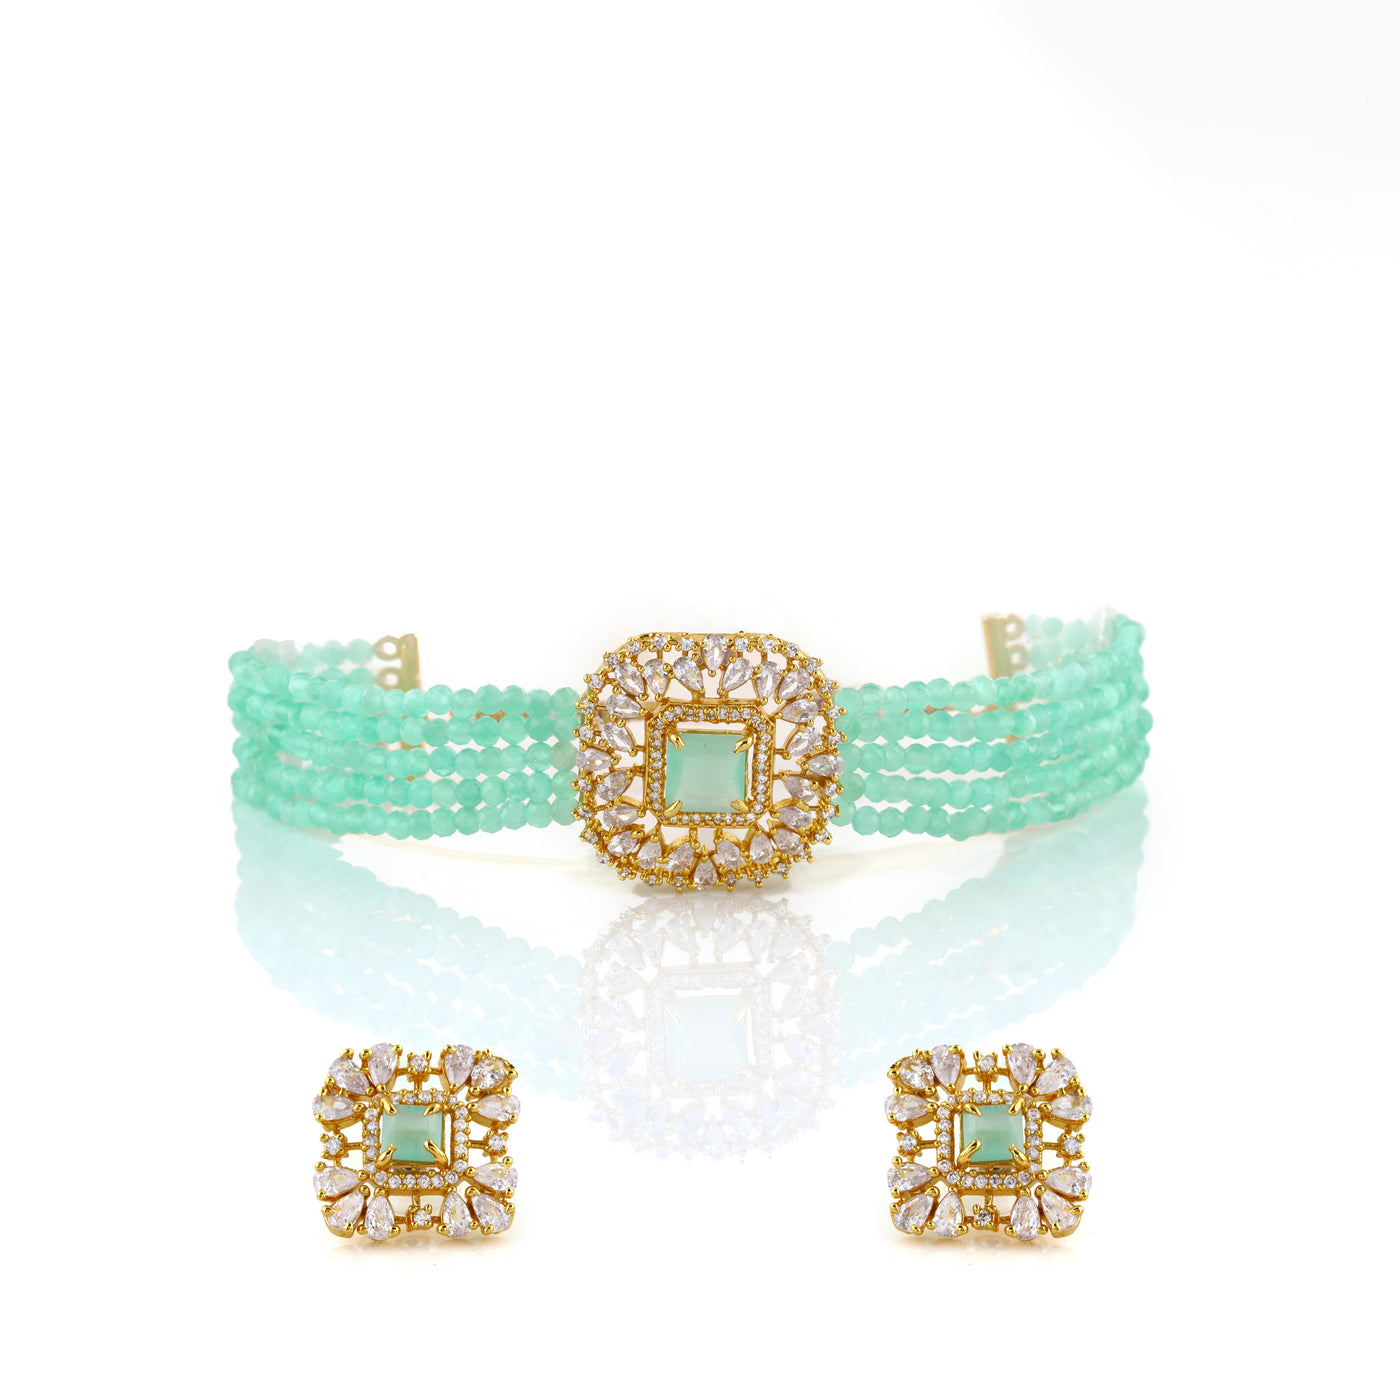 Estele Gold Plated CZ Square Shaped Mint Green Choker Necklace Set for Women (one piece)